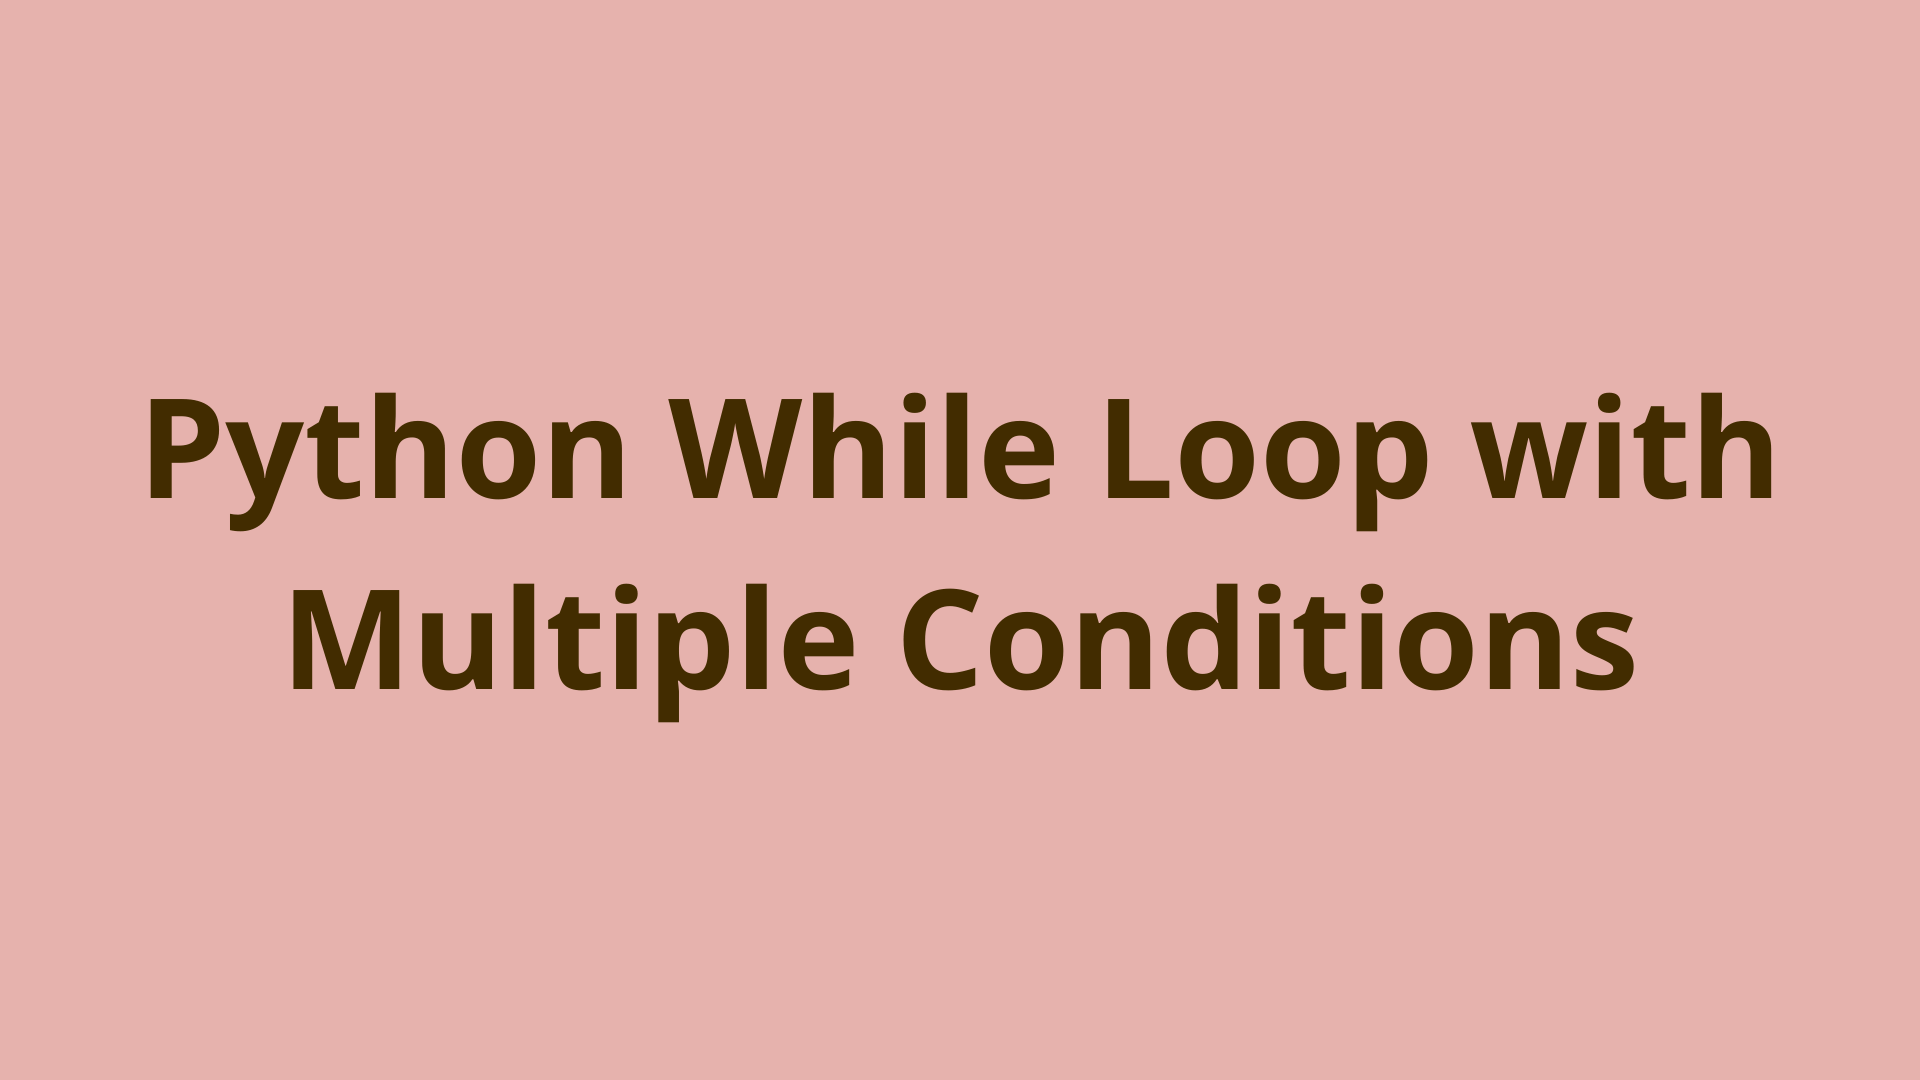 Image of Writing a Python While Loop with Multiple Conditions